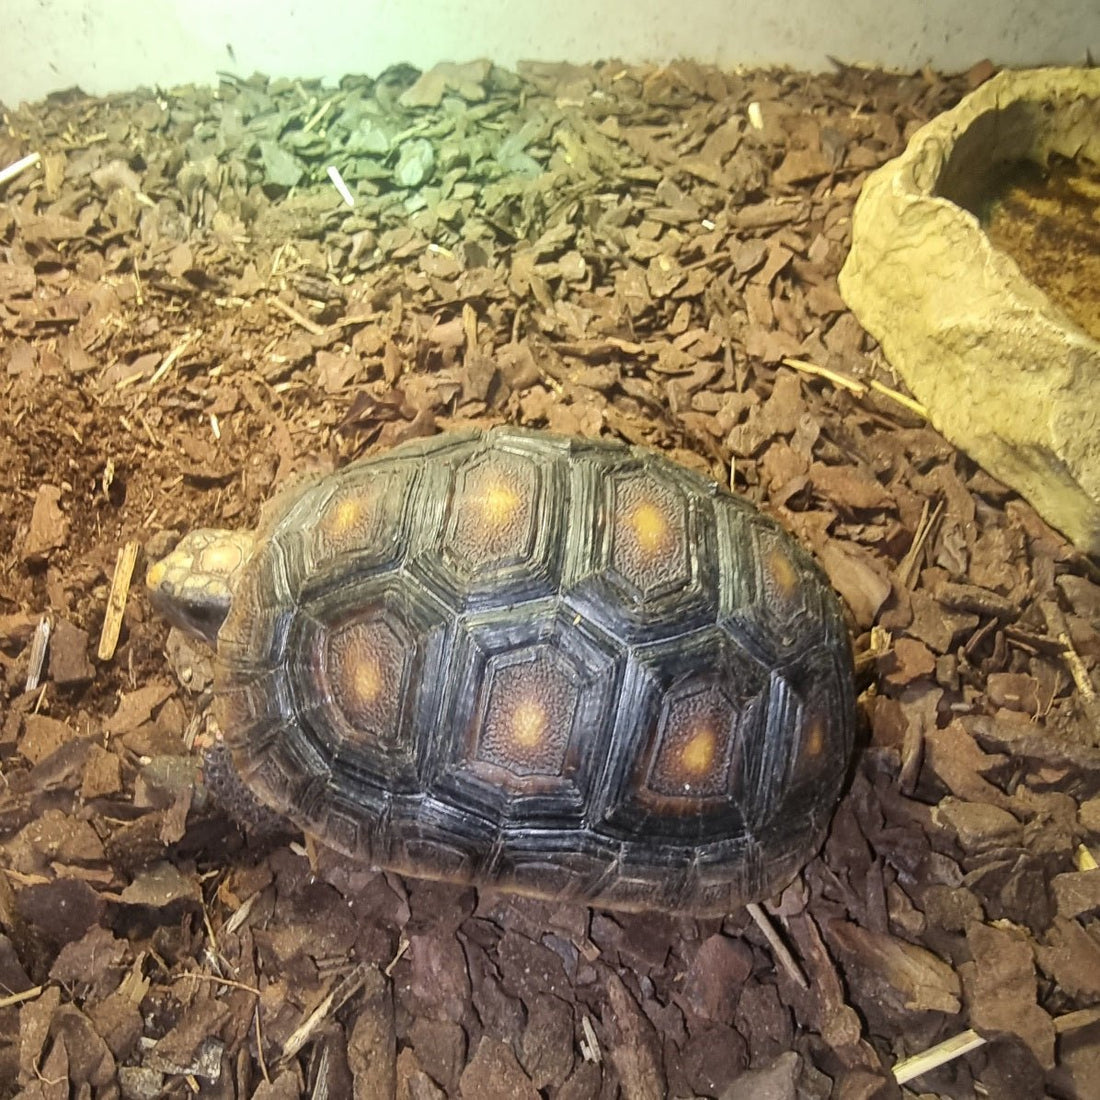 Kurtle the redfoot tortoise